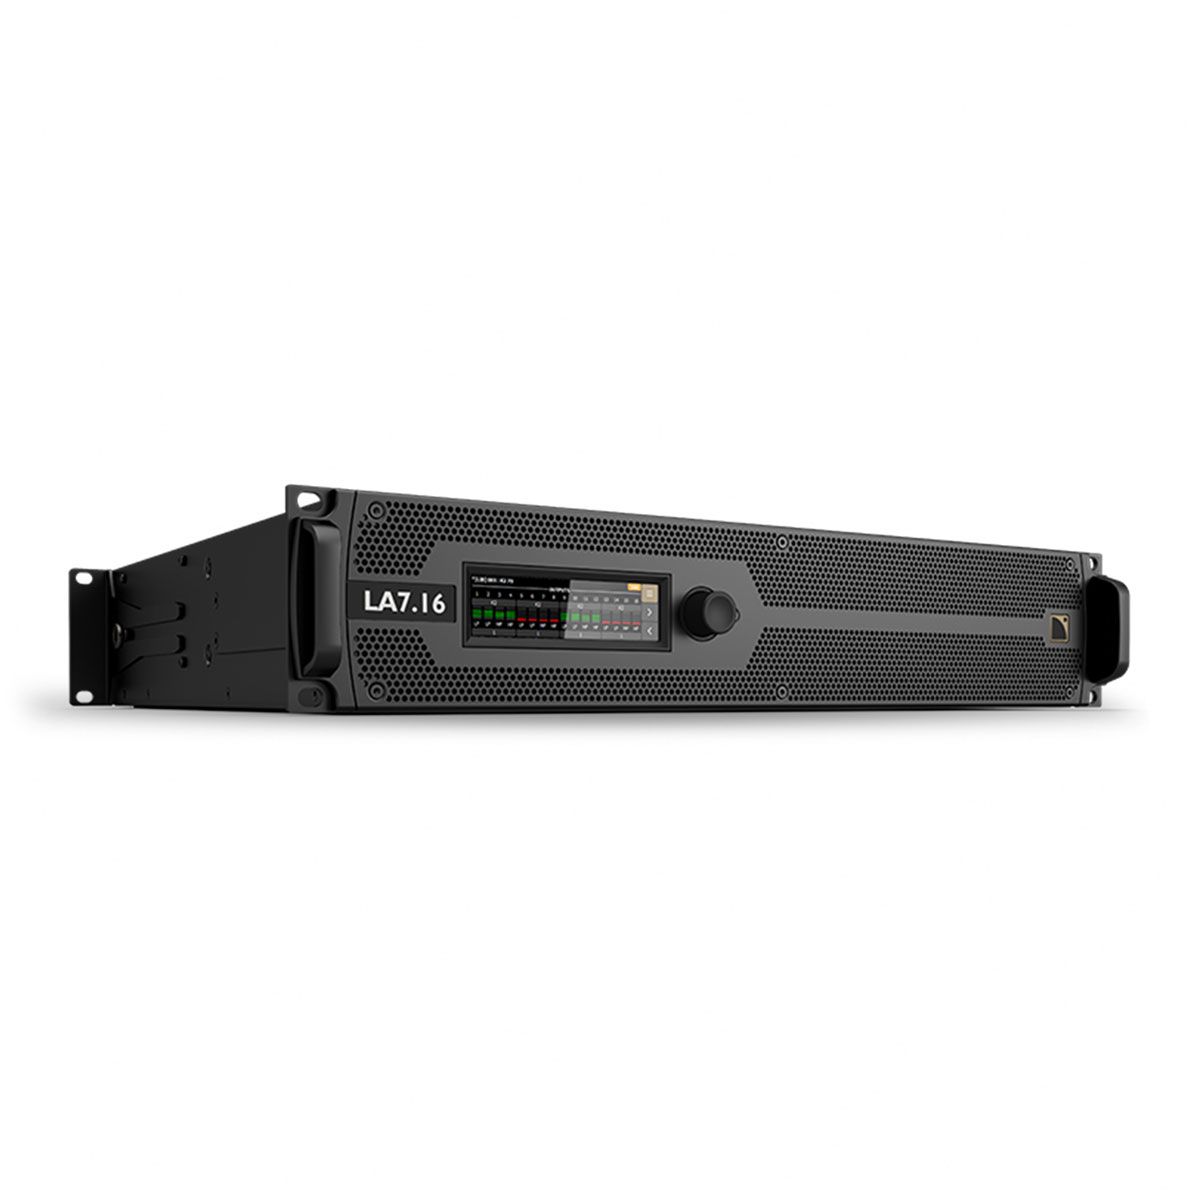 L-Acoustics Launches Touring Version of Revolutionary Multichannel LA7.16 Amplified Controller featured image